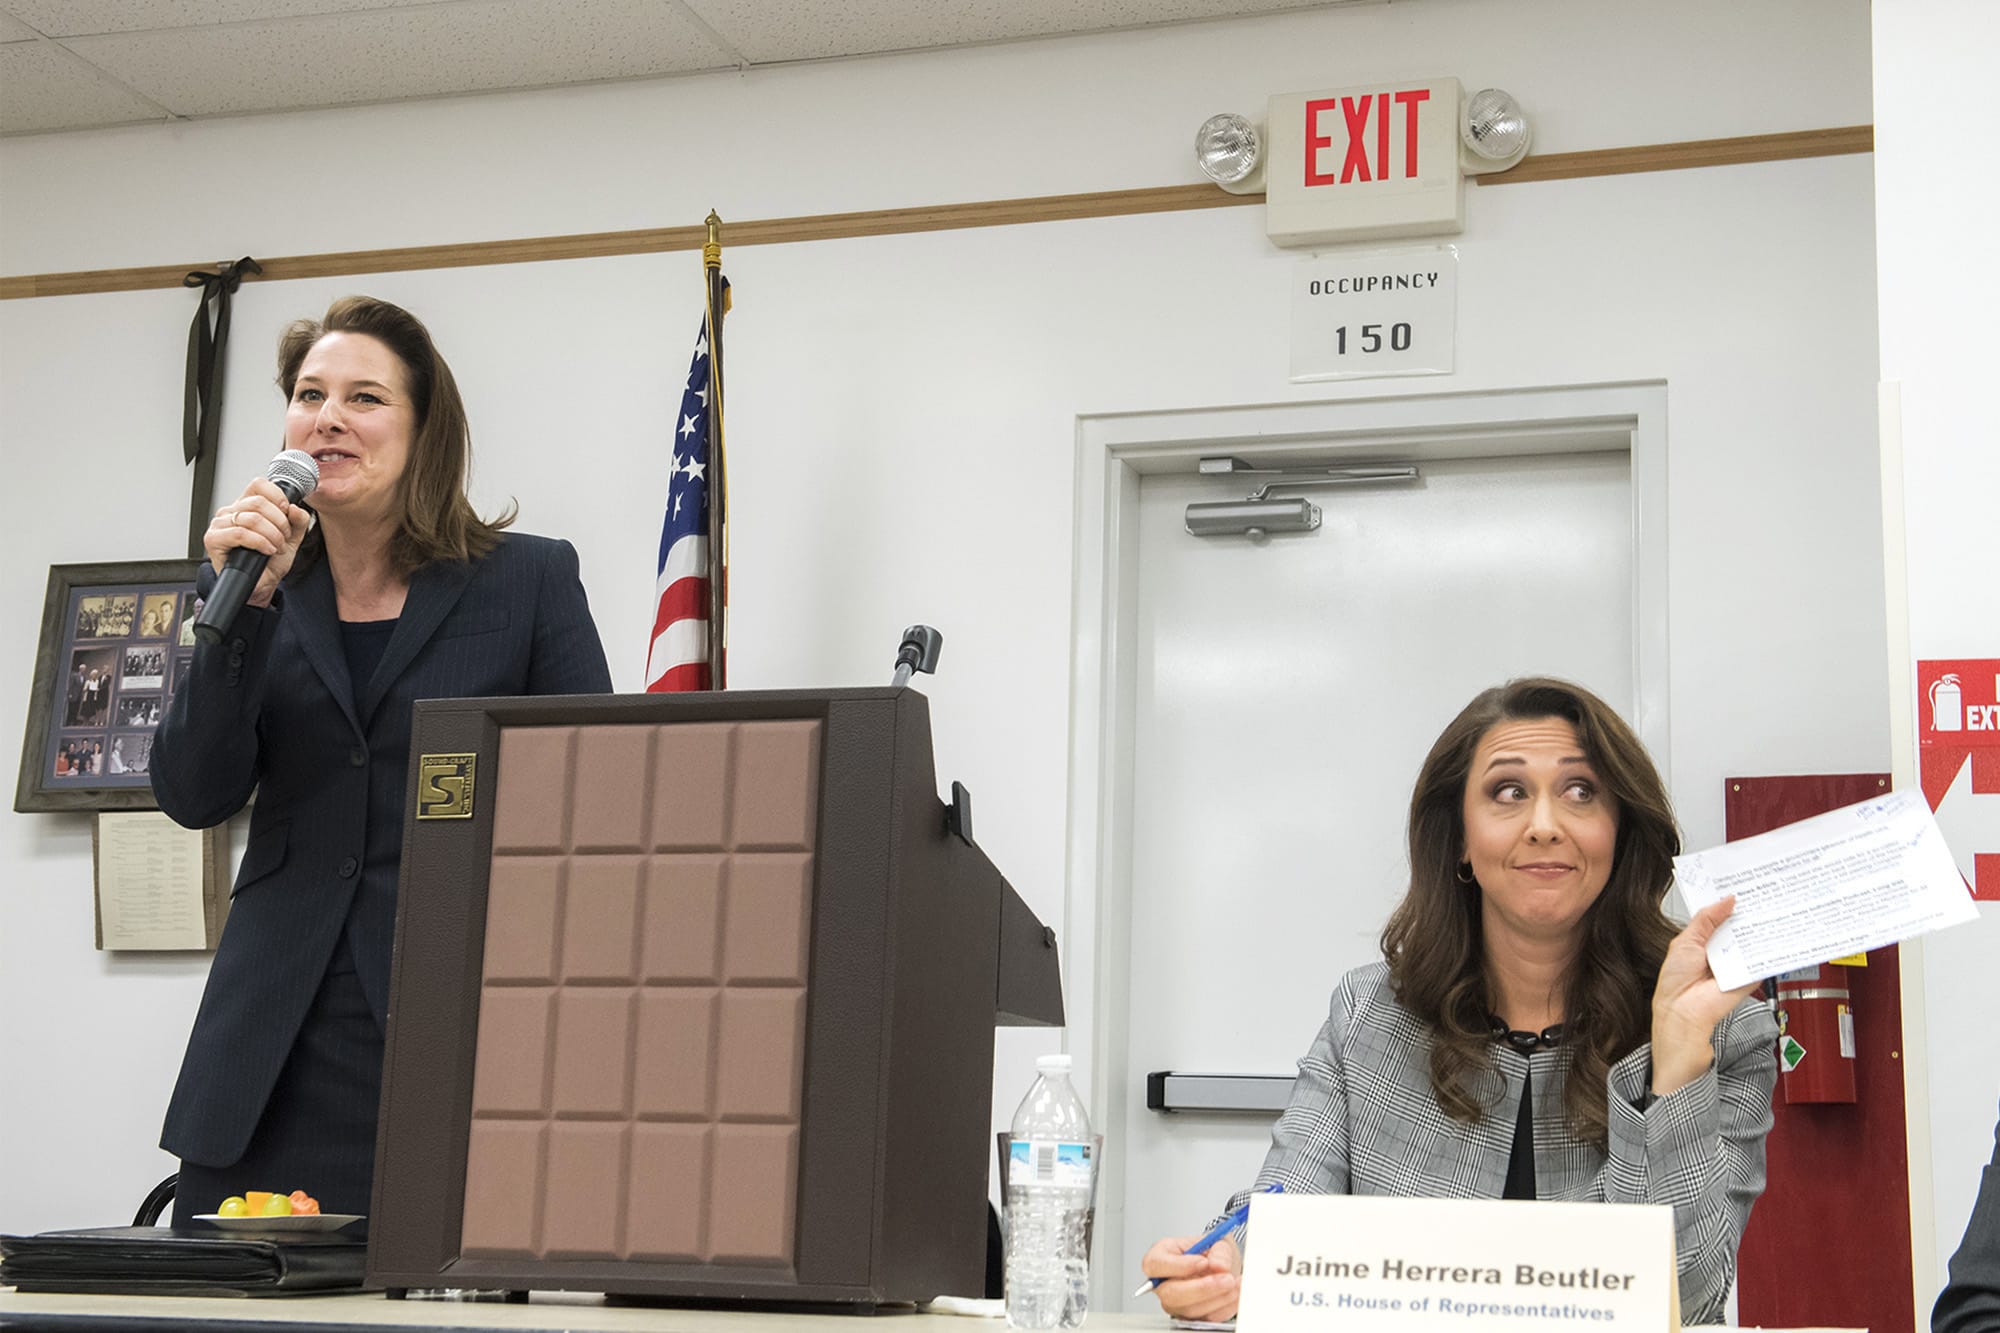 Carolyn Long, Democratic candidate for the 3rd Congressional District, left, speaks about quotes she claims are misrepresented while Incumbent U.S. Rep. Jaime Herrera Beutler, R-Battle Ground, holds up a printout of the quotes in question during a forum at the Goldendale Grange Hall Wednesday night.